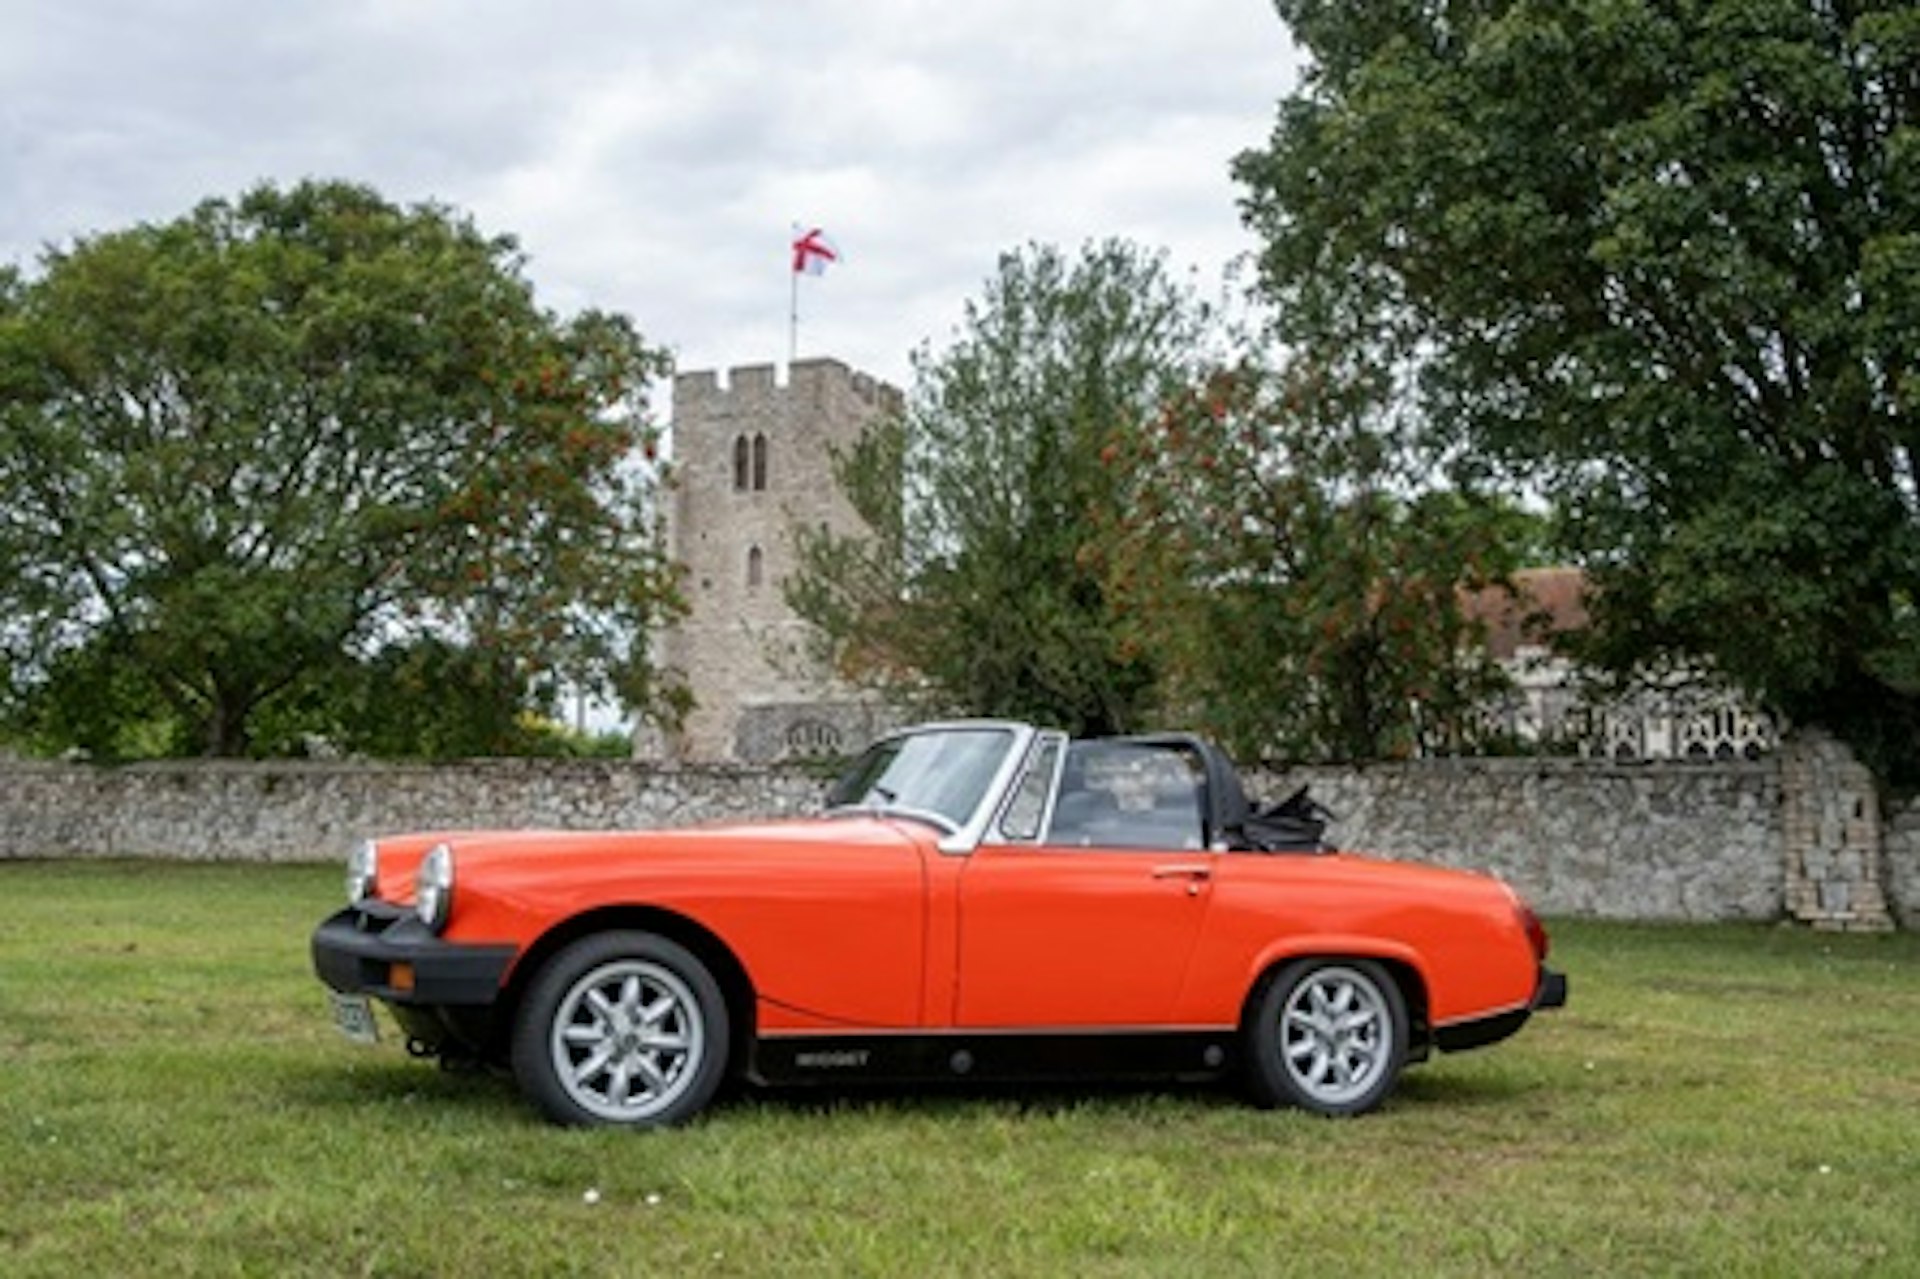 MG Midget Classic Car On Road Driving Experience - Weekday